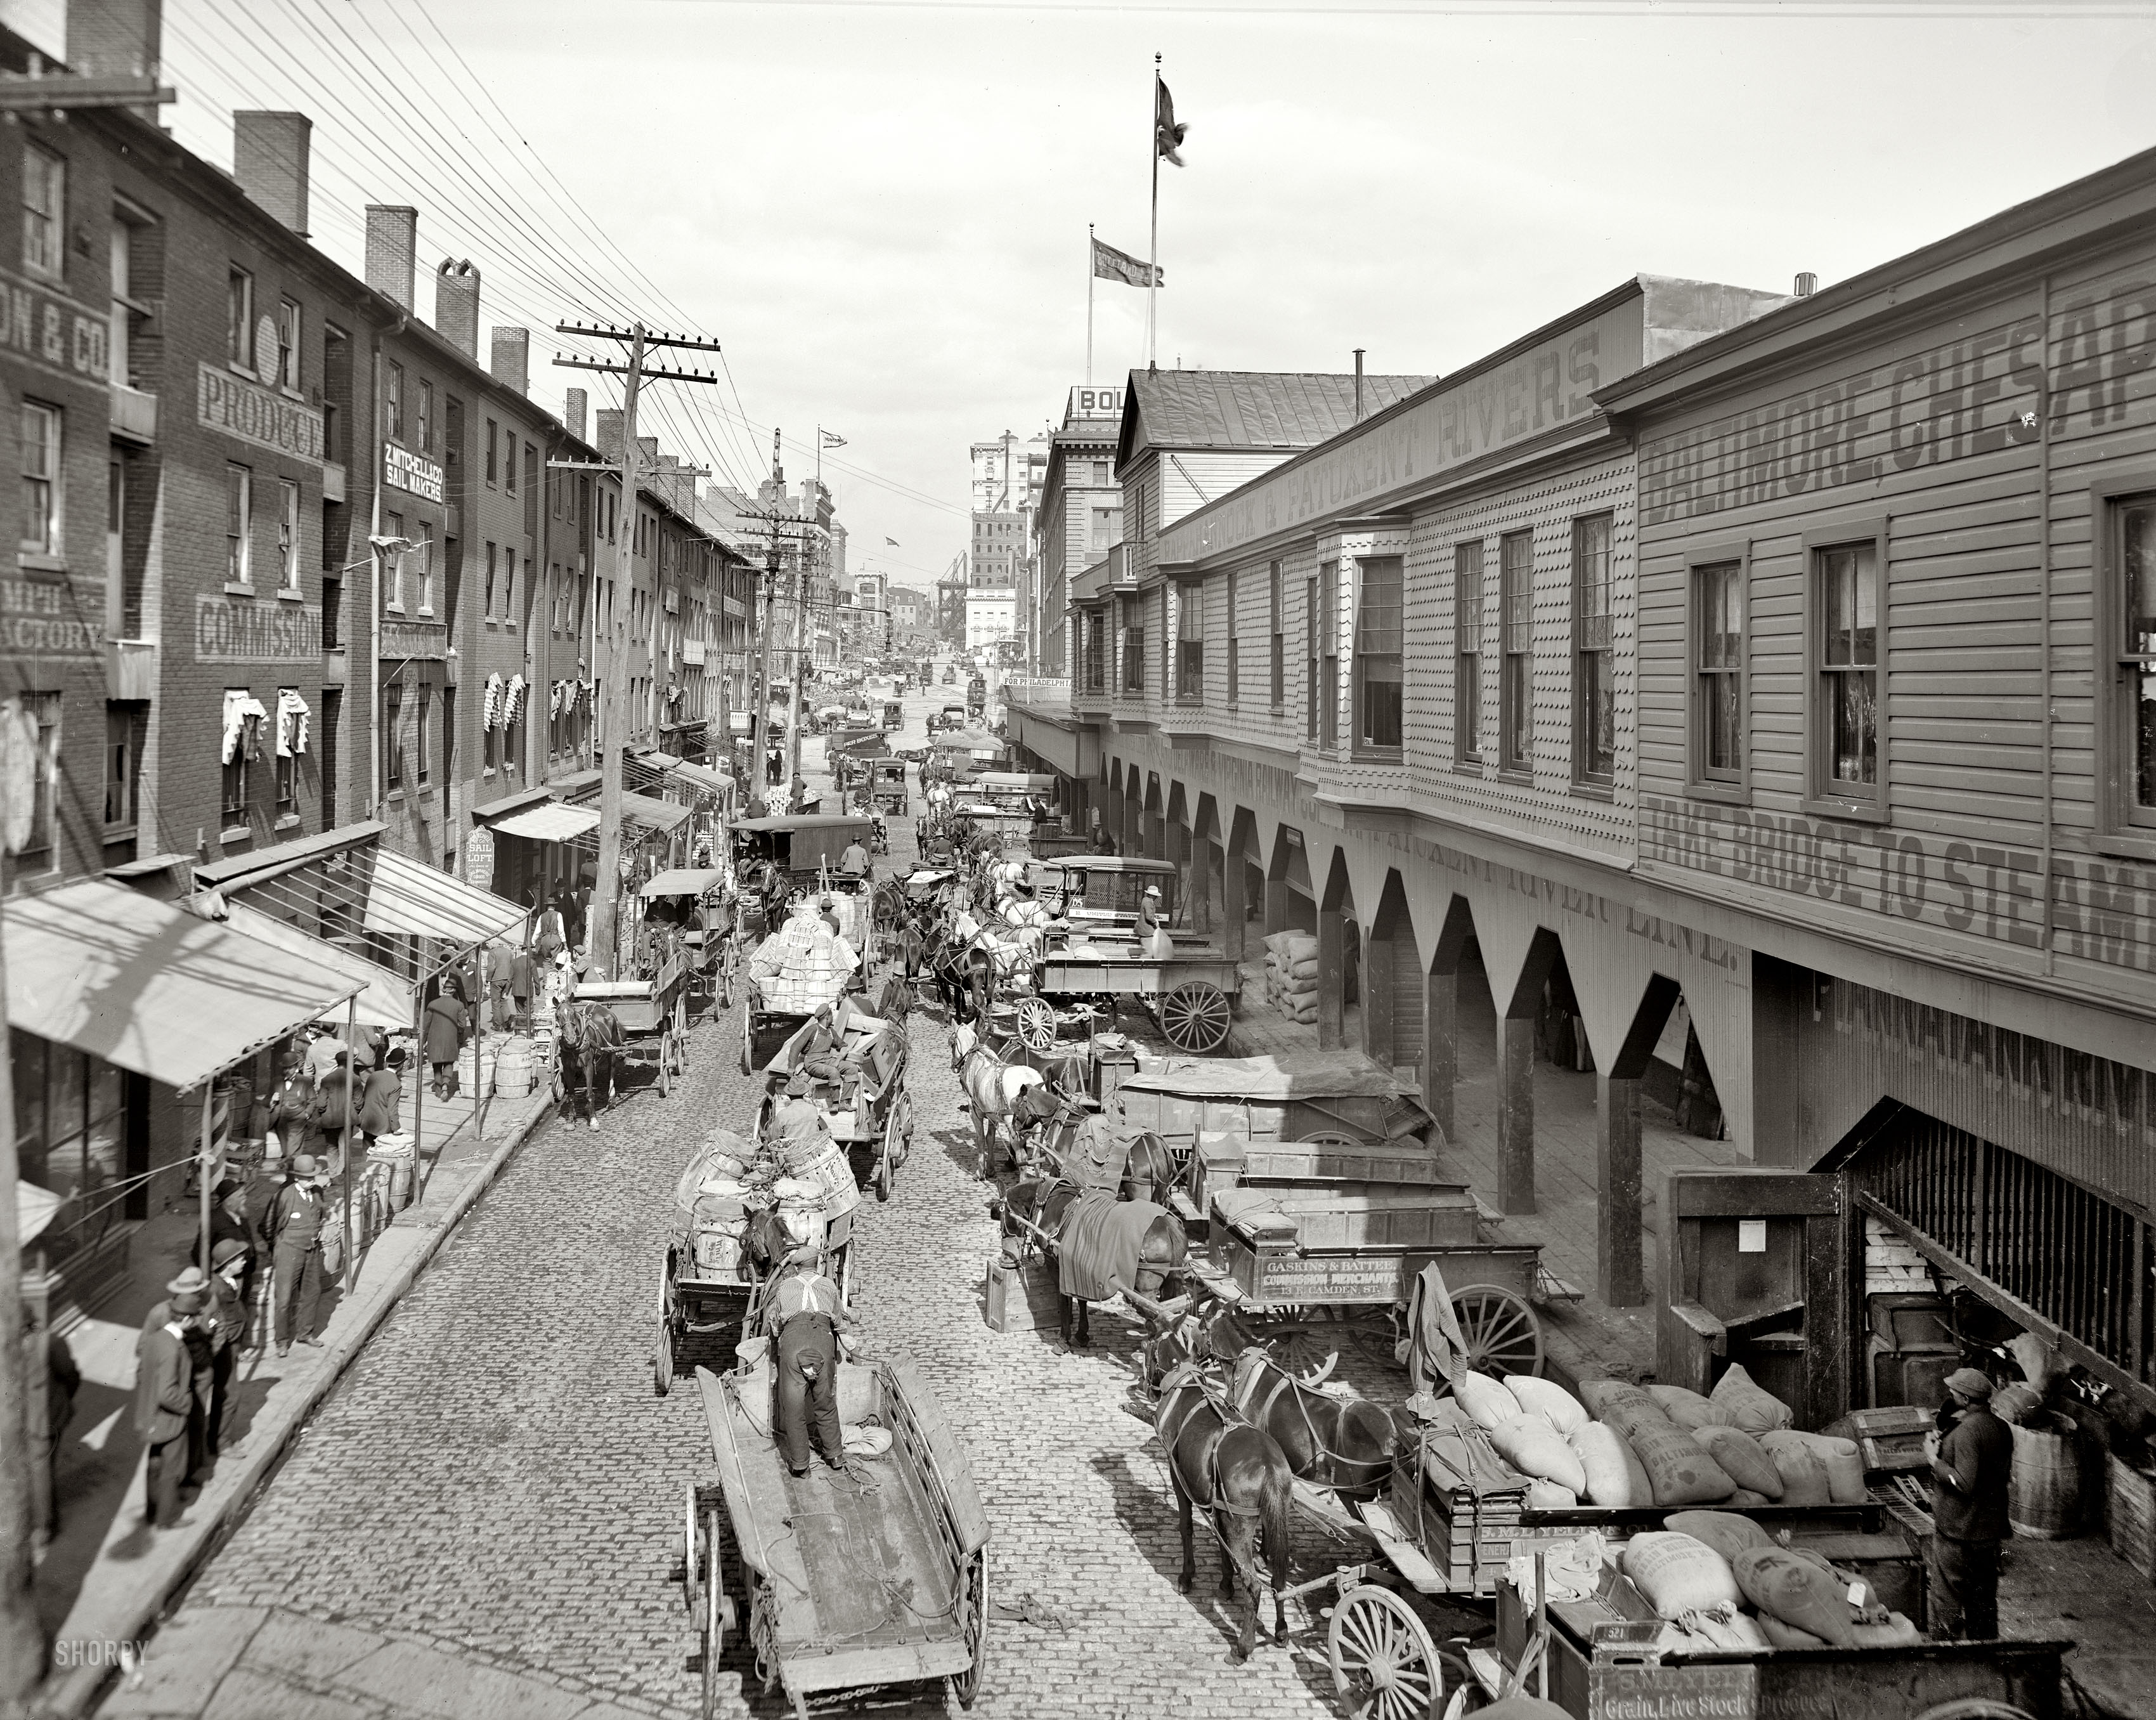 Baltimore, Maryland, circa 1906. "Light Street looking north." 8x10 inch dry plate glass negative, Detroit Publishing Company. View full size.